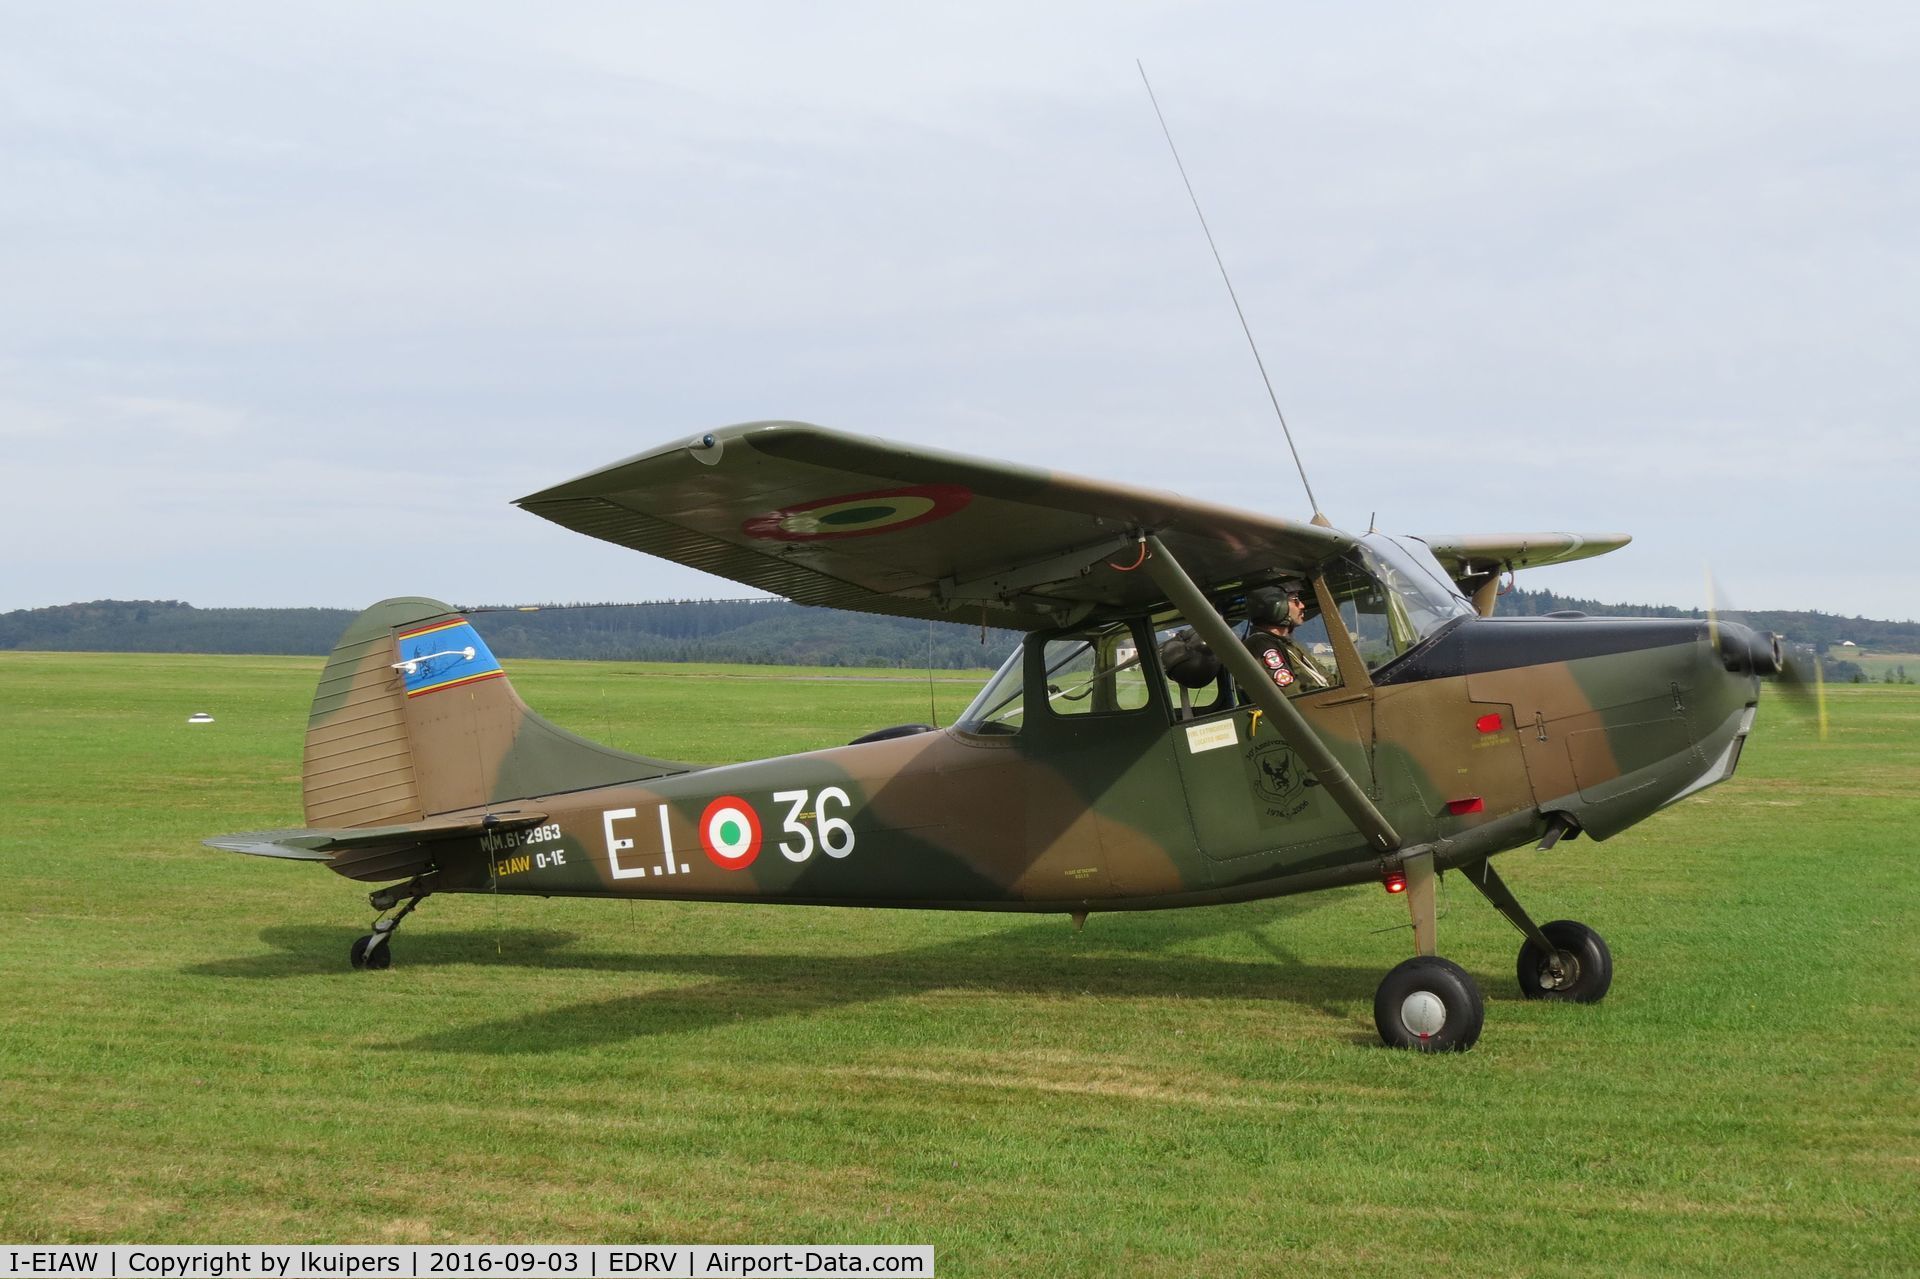 I-EIAW, 1961 Cessna O-1E Bird Dog C/N 305M-0029, On a Cessna meeting at a small local event in Wershofen Germany